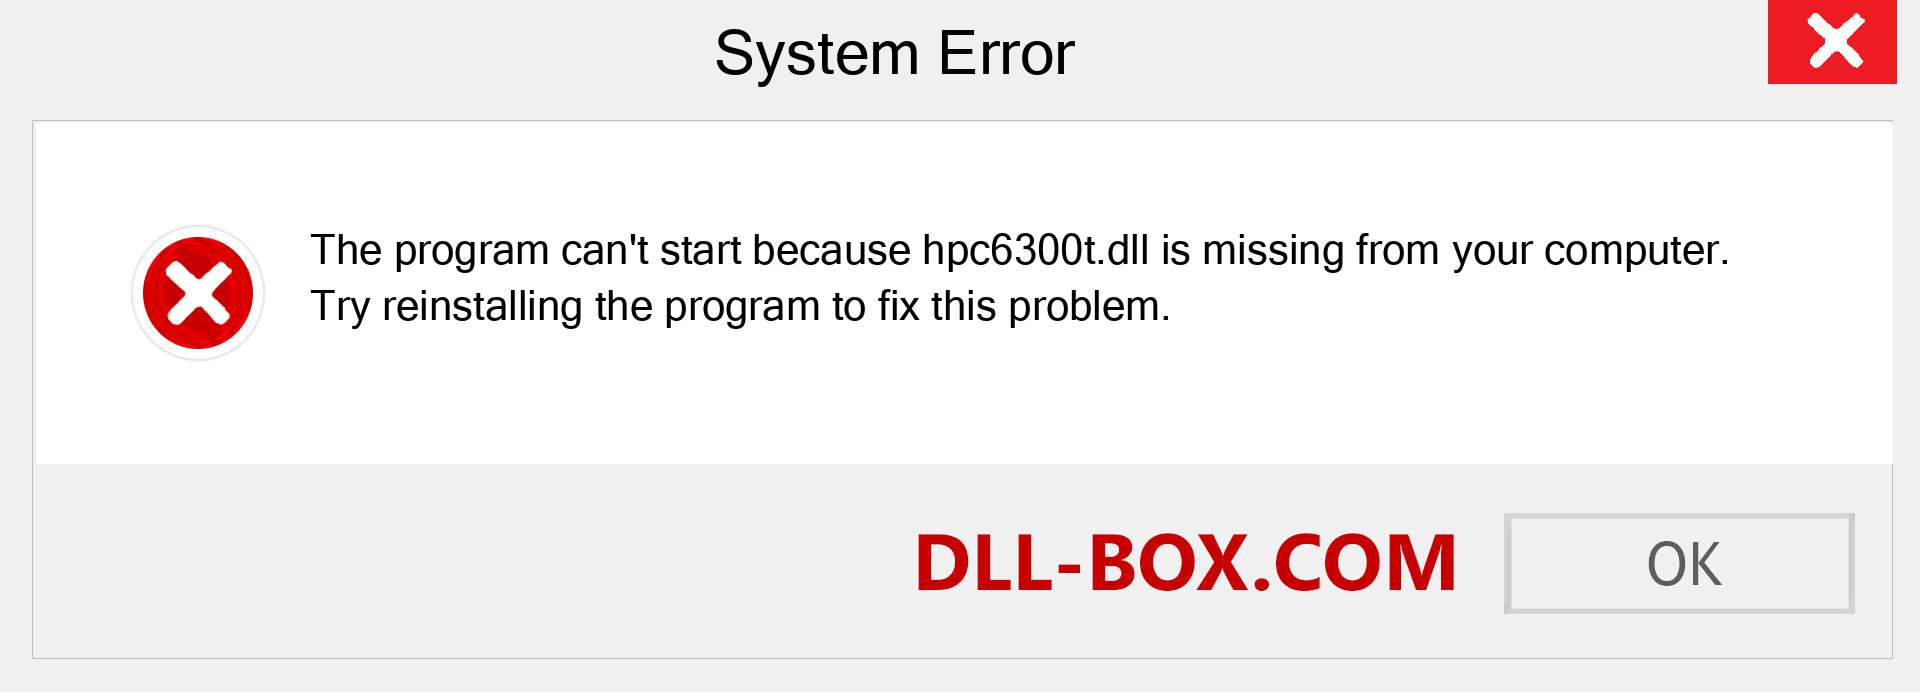  hpc6300t.dll file is missing?. Download for Windows 7, 8, 10 - Fix  hpc6300t dll Missing Error on Windows, photos, images